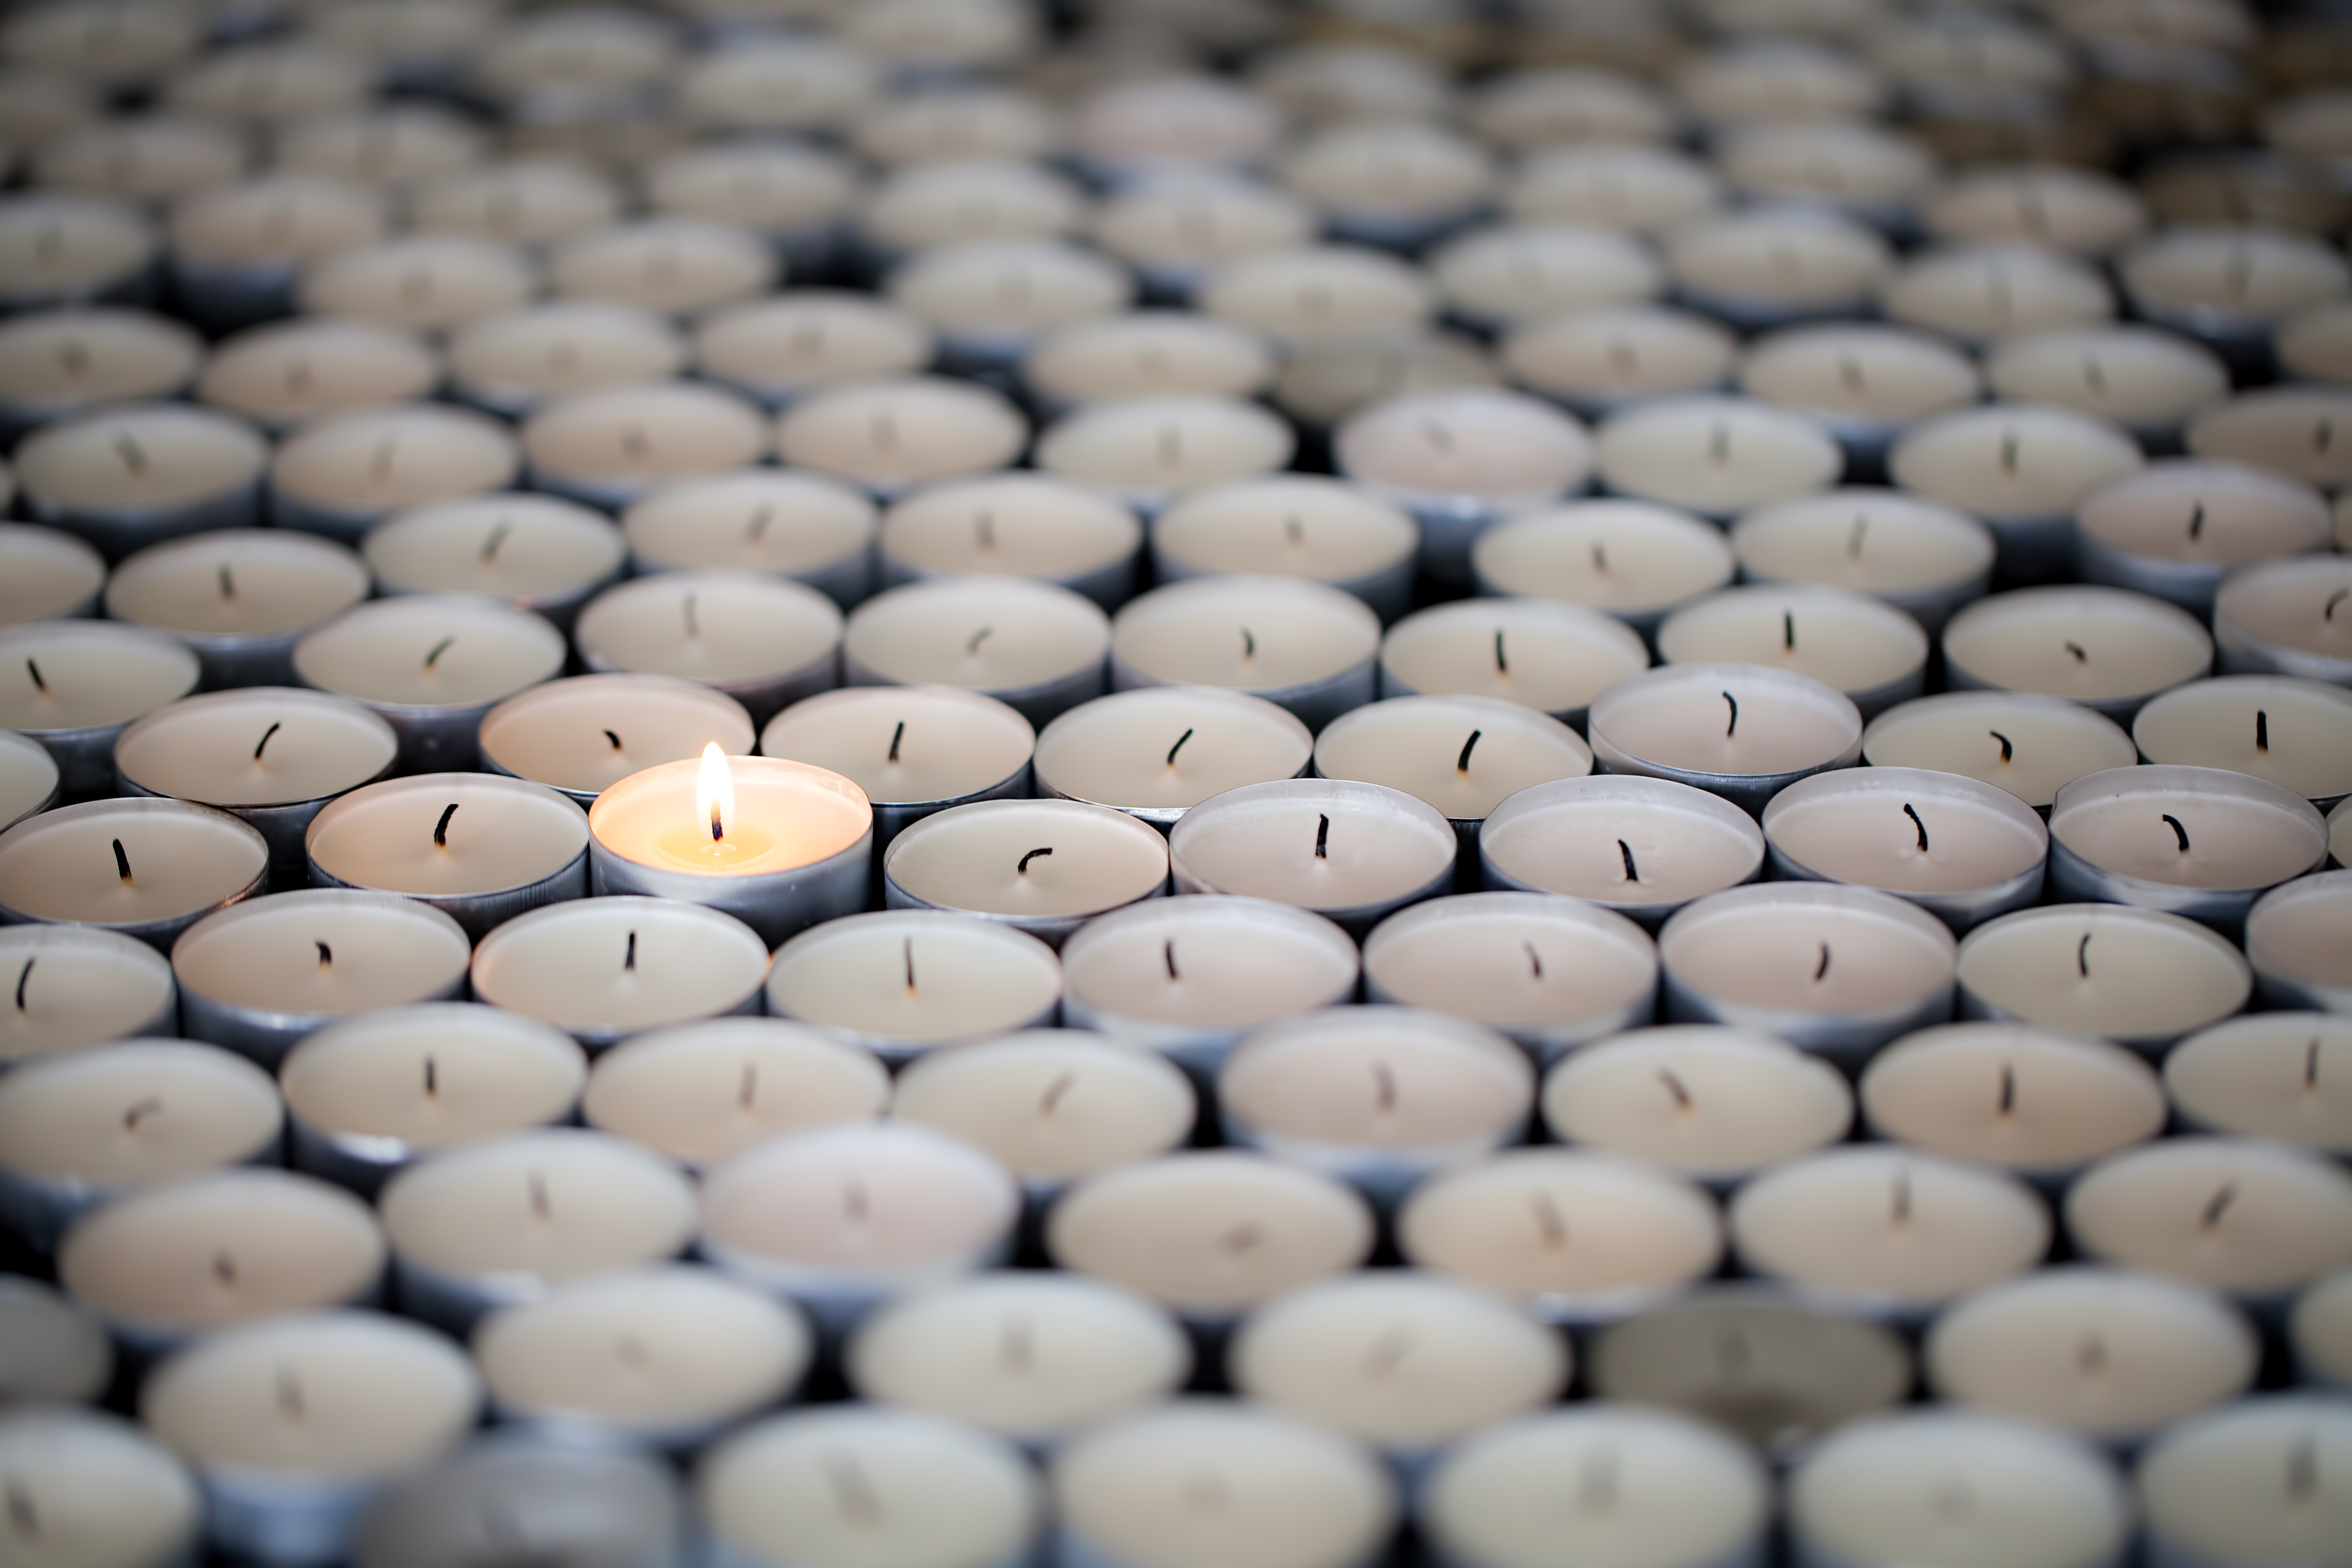 Standing alone. Single resilient flame keeps burning amongst many extinguished tealight candles. Solitary shining light stands out with selective focus.